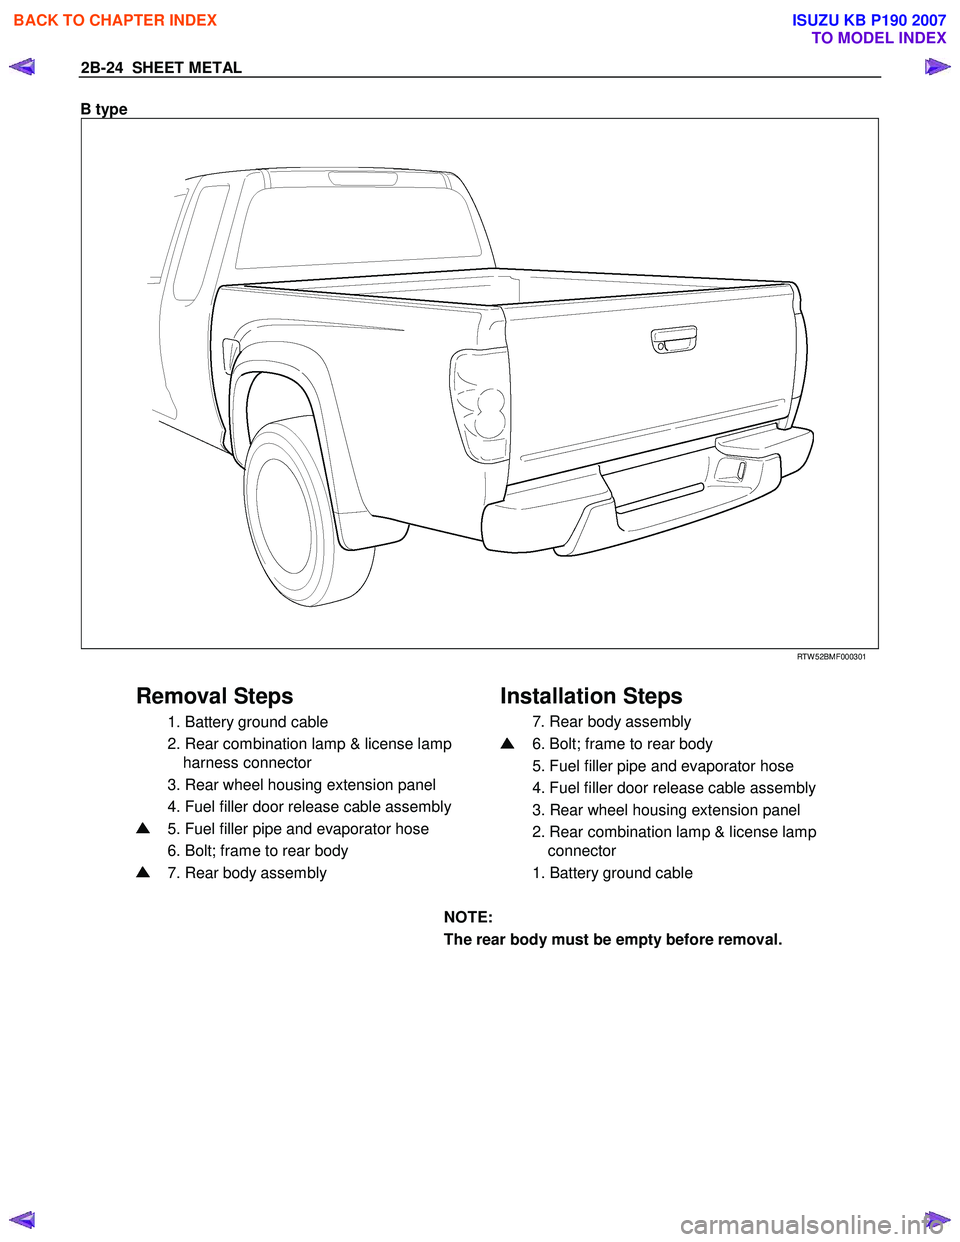 ISUZU KB P190 2007  Workshop Repair Manual 2B-24  SHEET METAL 
B type  
 
 RTW 52BMF000301 
 
Removal Steps   Installation Steps 
  1. Battery ground cable  
  2. Rear combination lamp & license lamp 
harness connector  
  3. Rear wheel housin